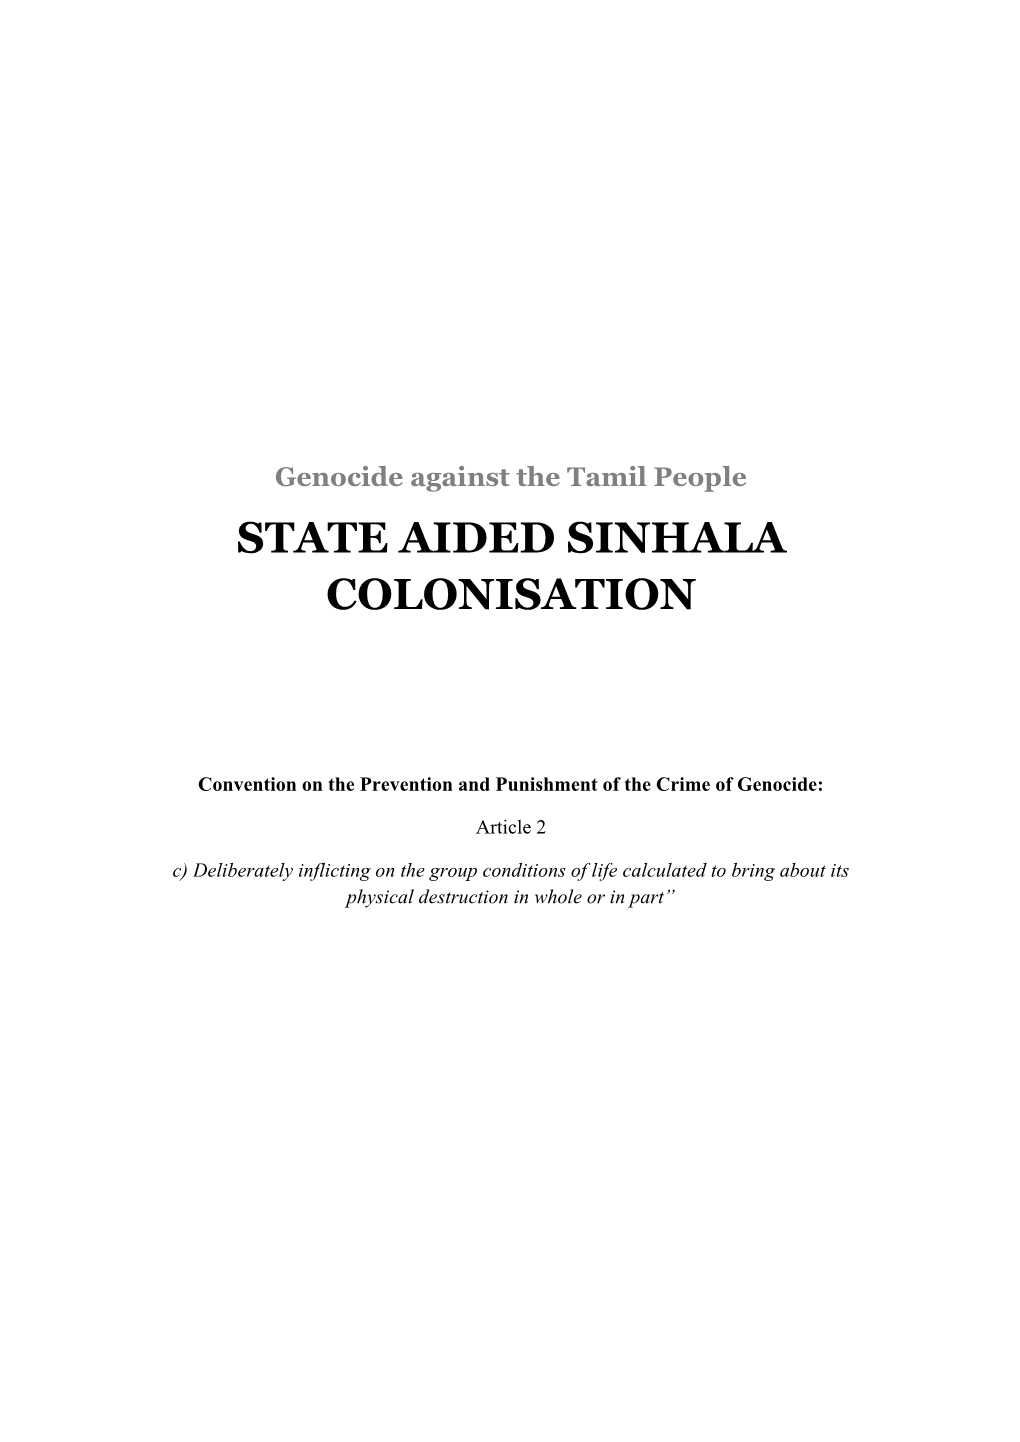 State Aided Sinhala Colonisation